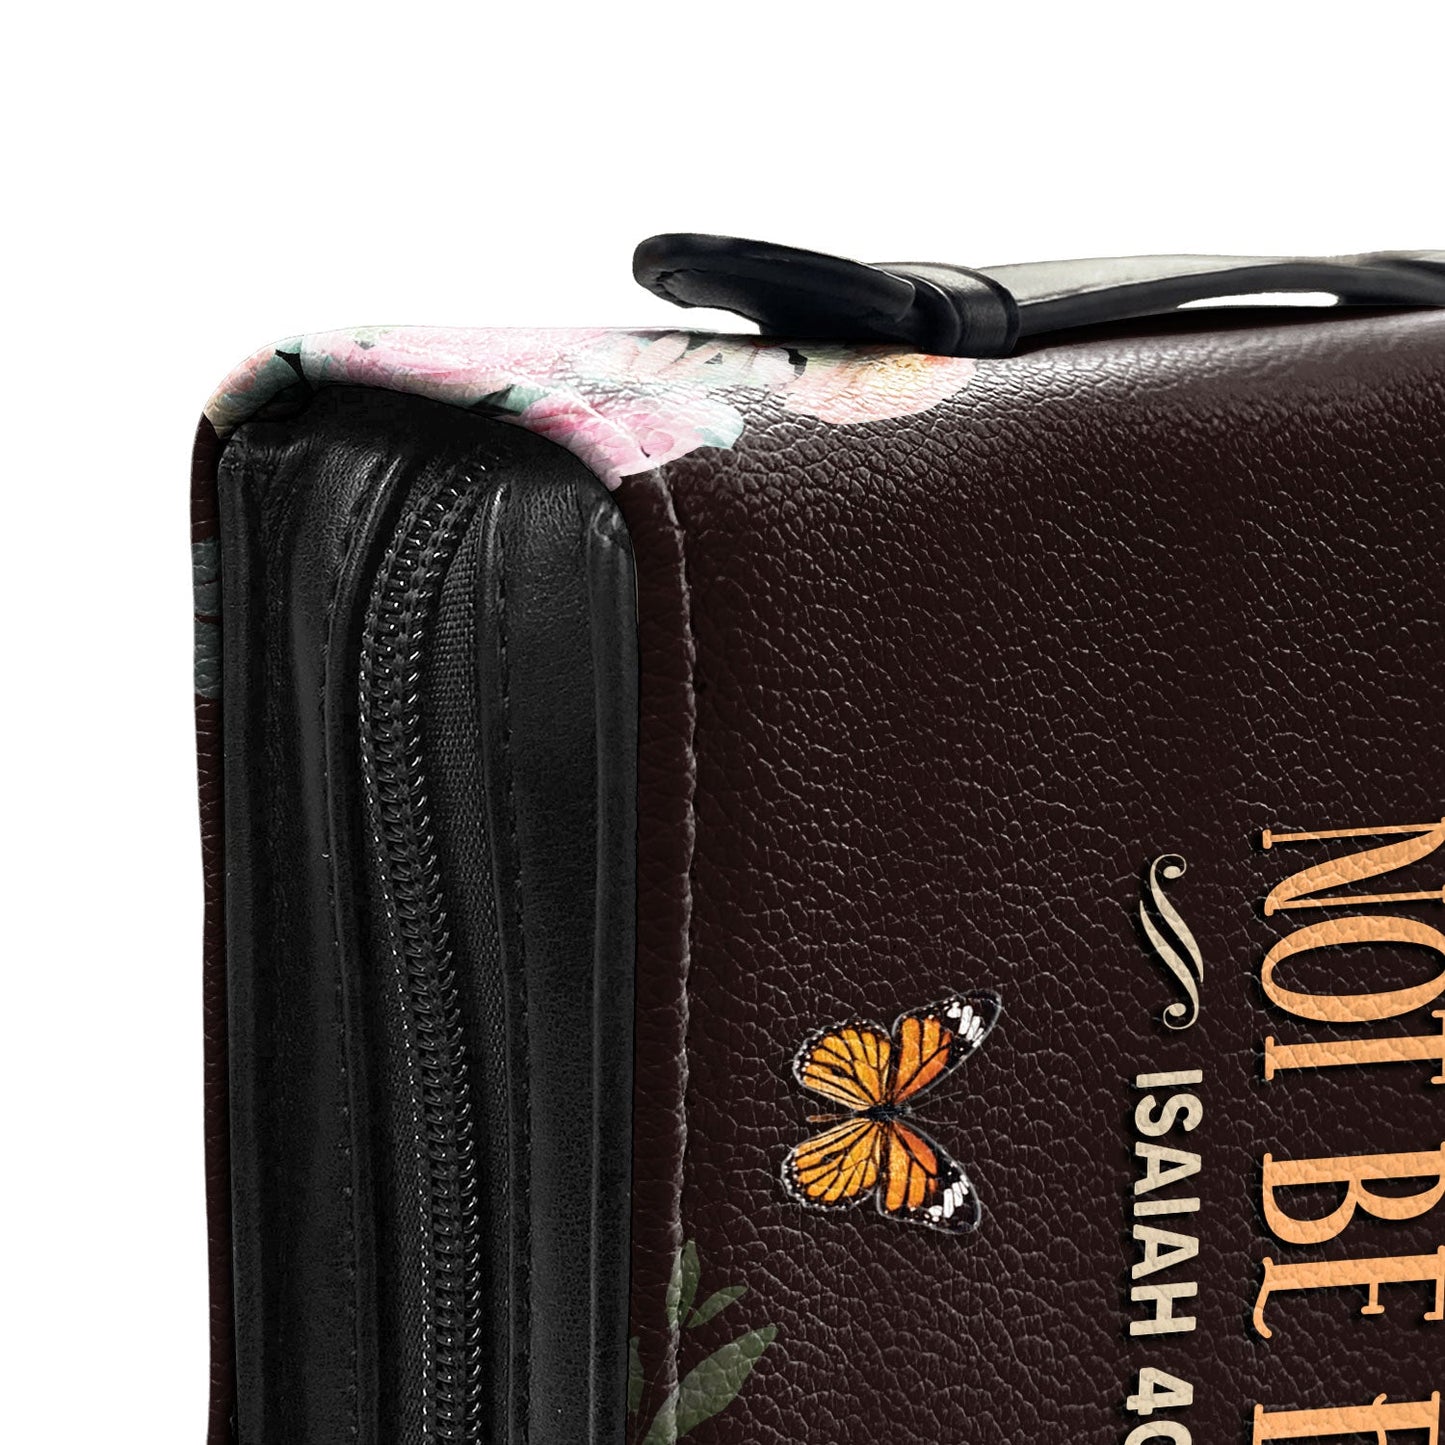 Personalized Bible Cover - But Those Who Hope In The Lord Will Renew Their Strength Isaiah 40 31 Lion Butterfly Bible Cover